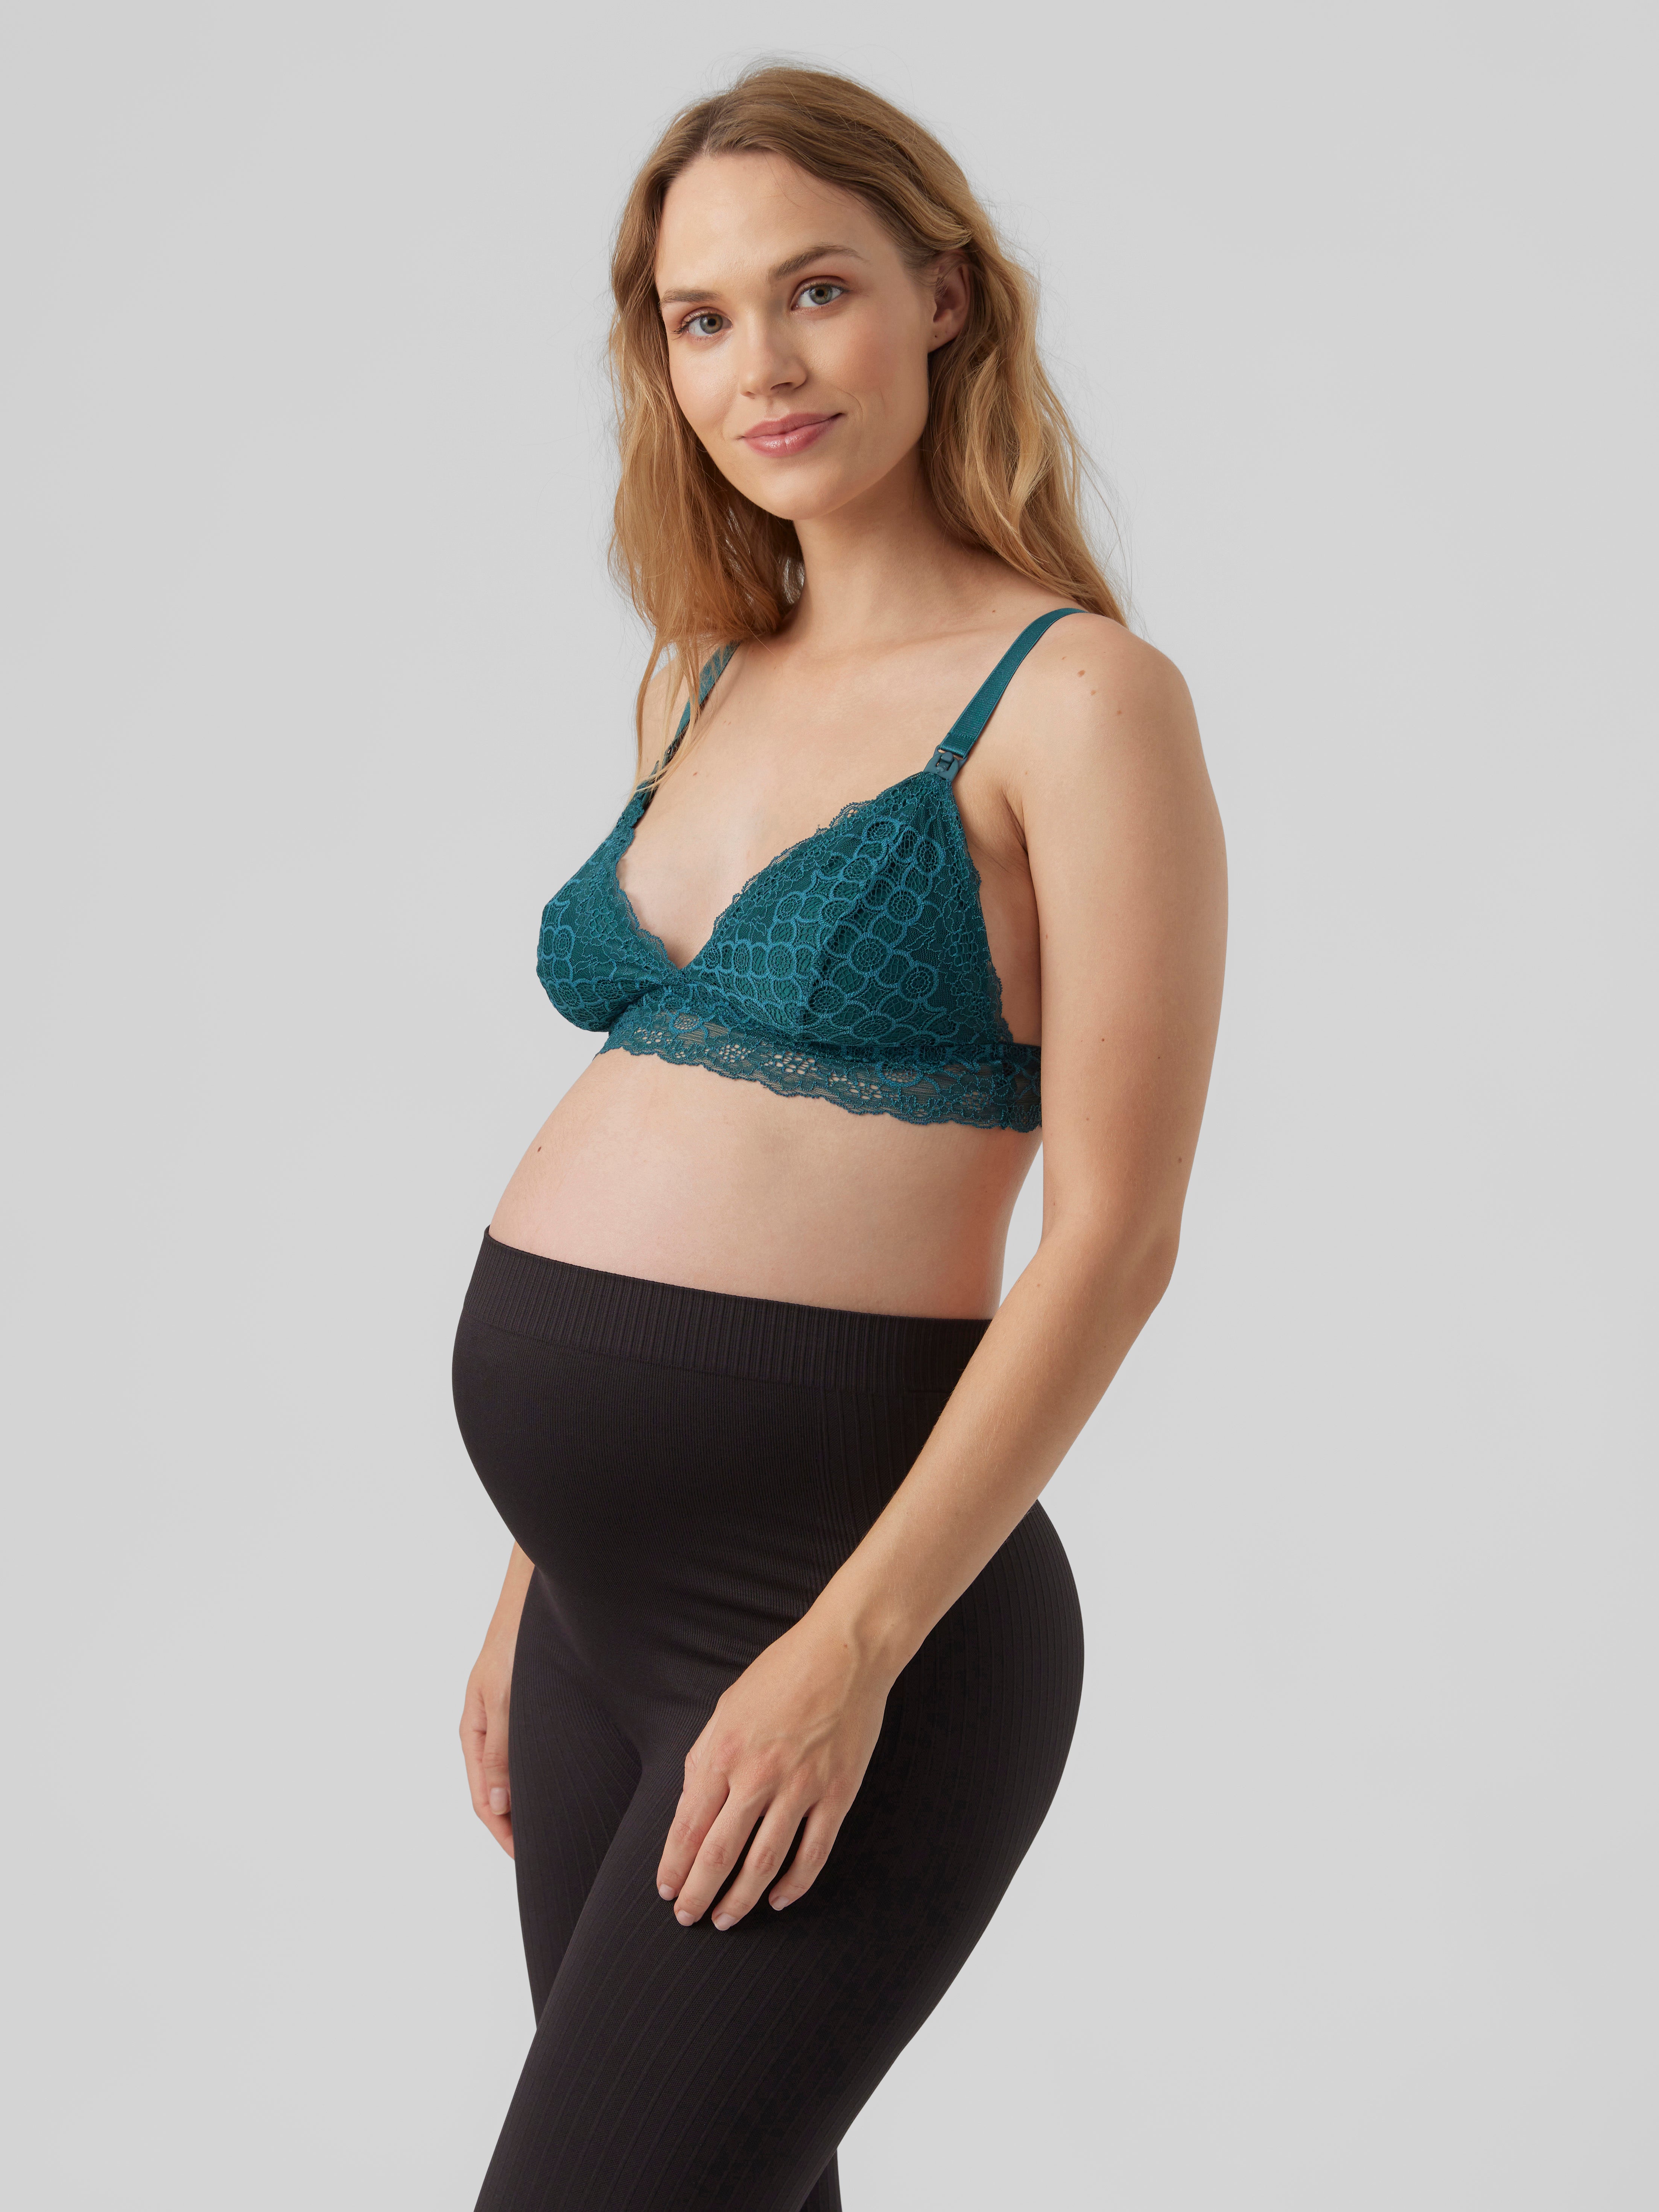 Sustainable/Eco-Friendly Maternity and Nursing Bras